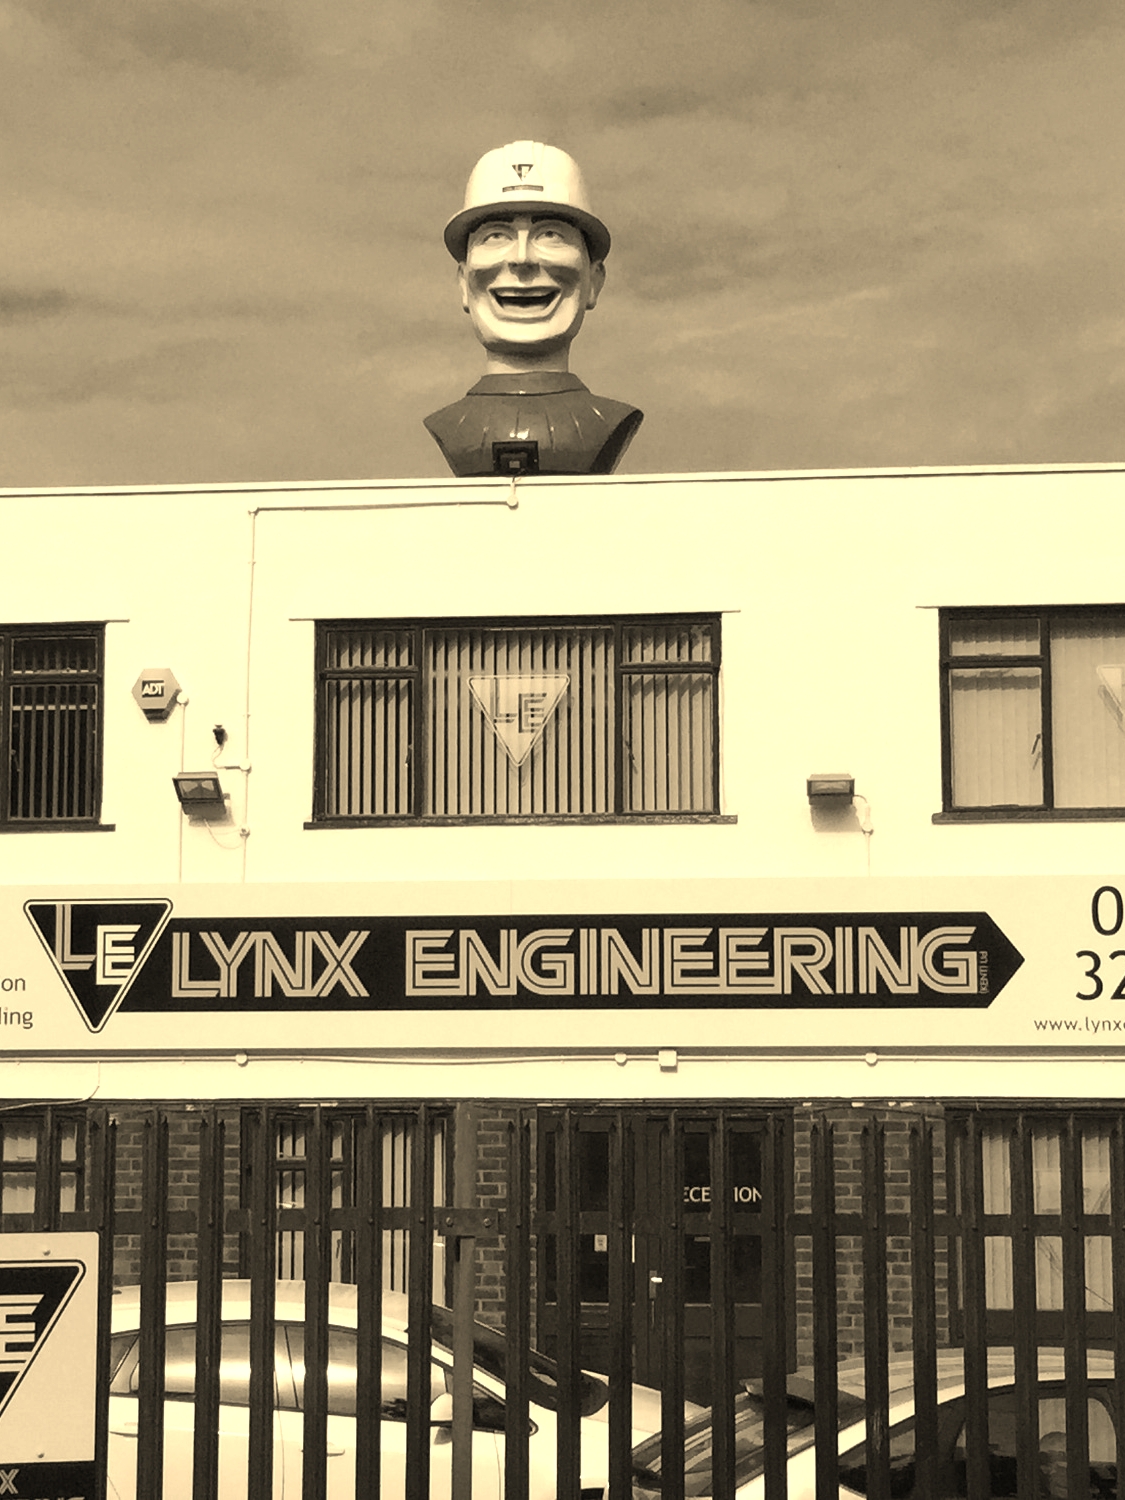 About Lynx Engineering Kent